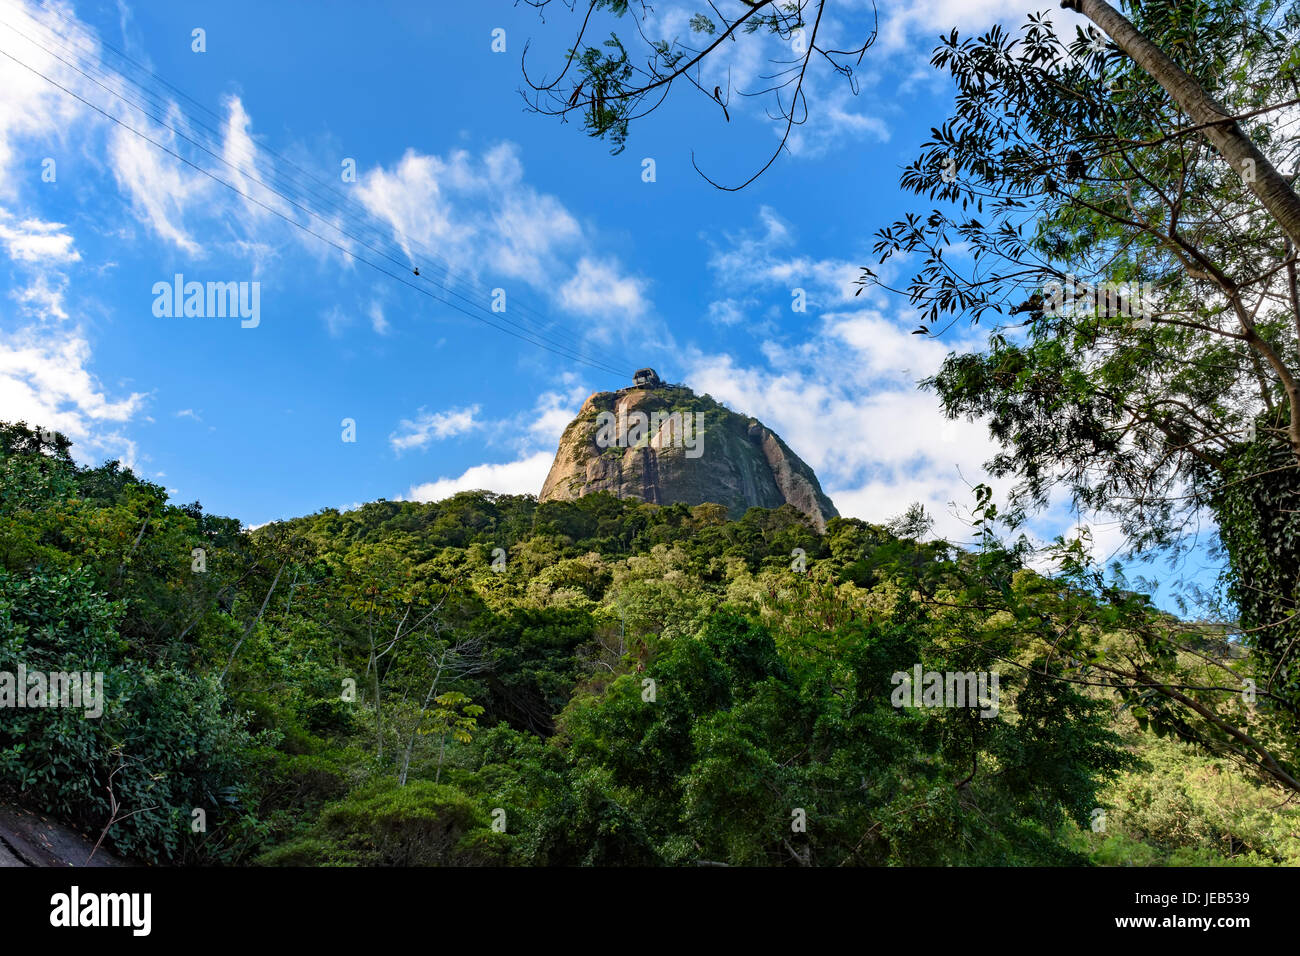 Sugar Loaf hill over the tropical forest on Rio de Janeiro, Brazil Stock Photo